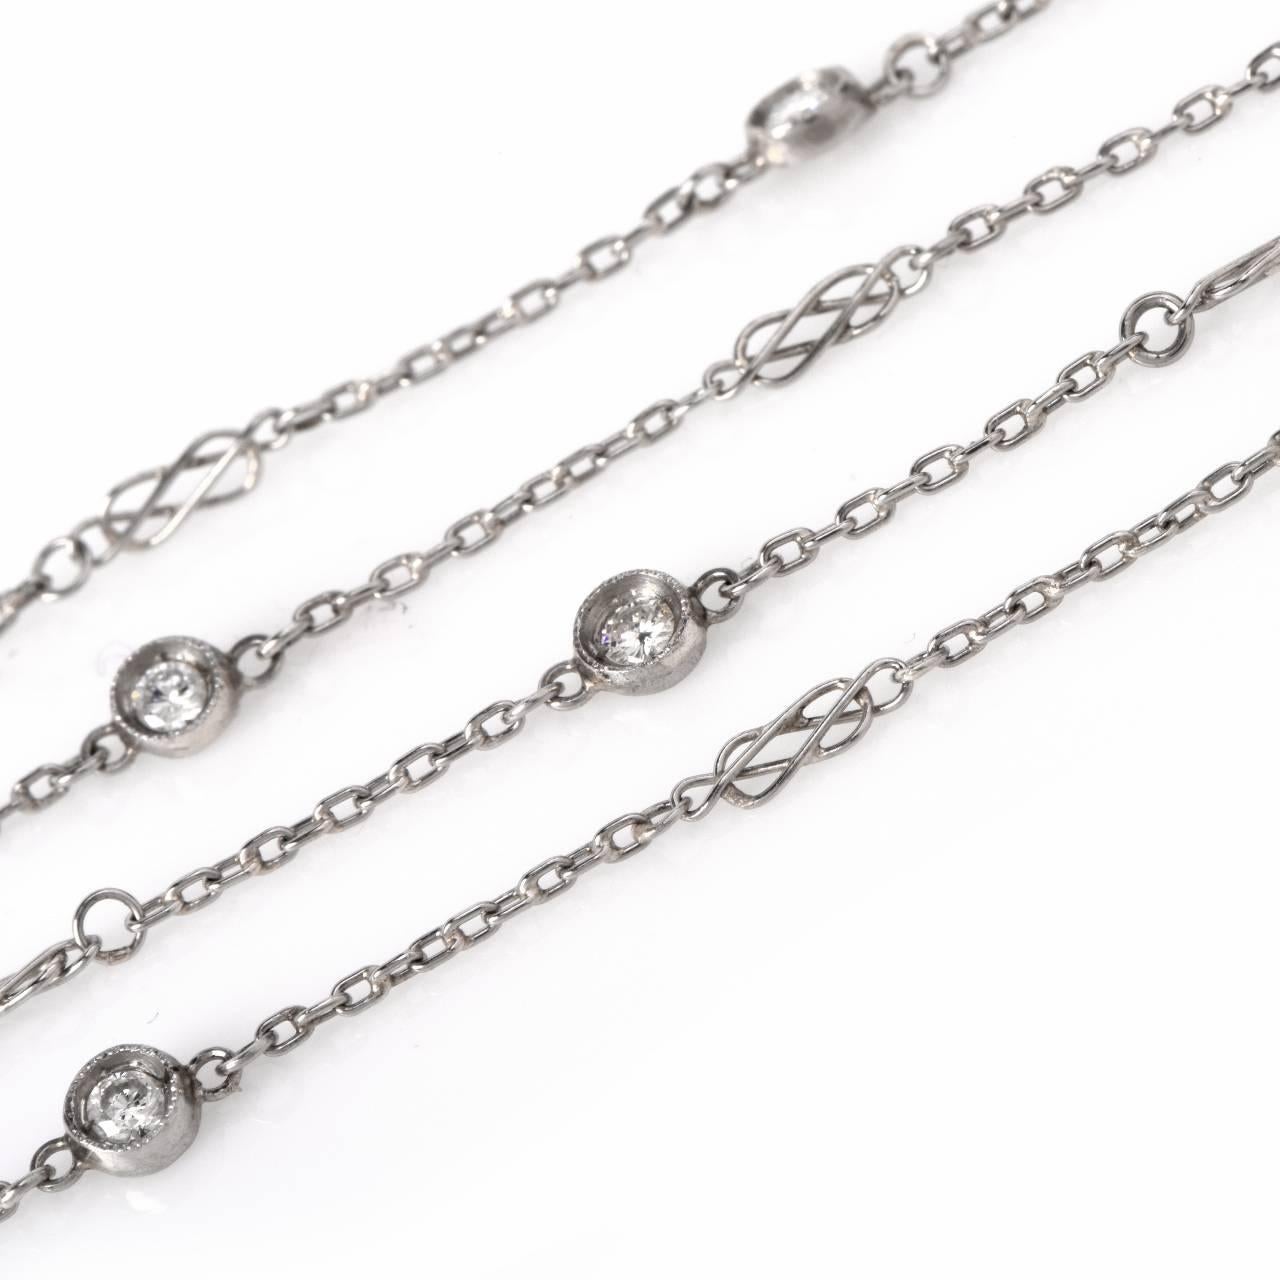 This  chain necklace of outstanding refinement and classic elegance is crafted in 14K white gold, weighing approx. 7.9 grams and measuring 40.4